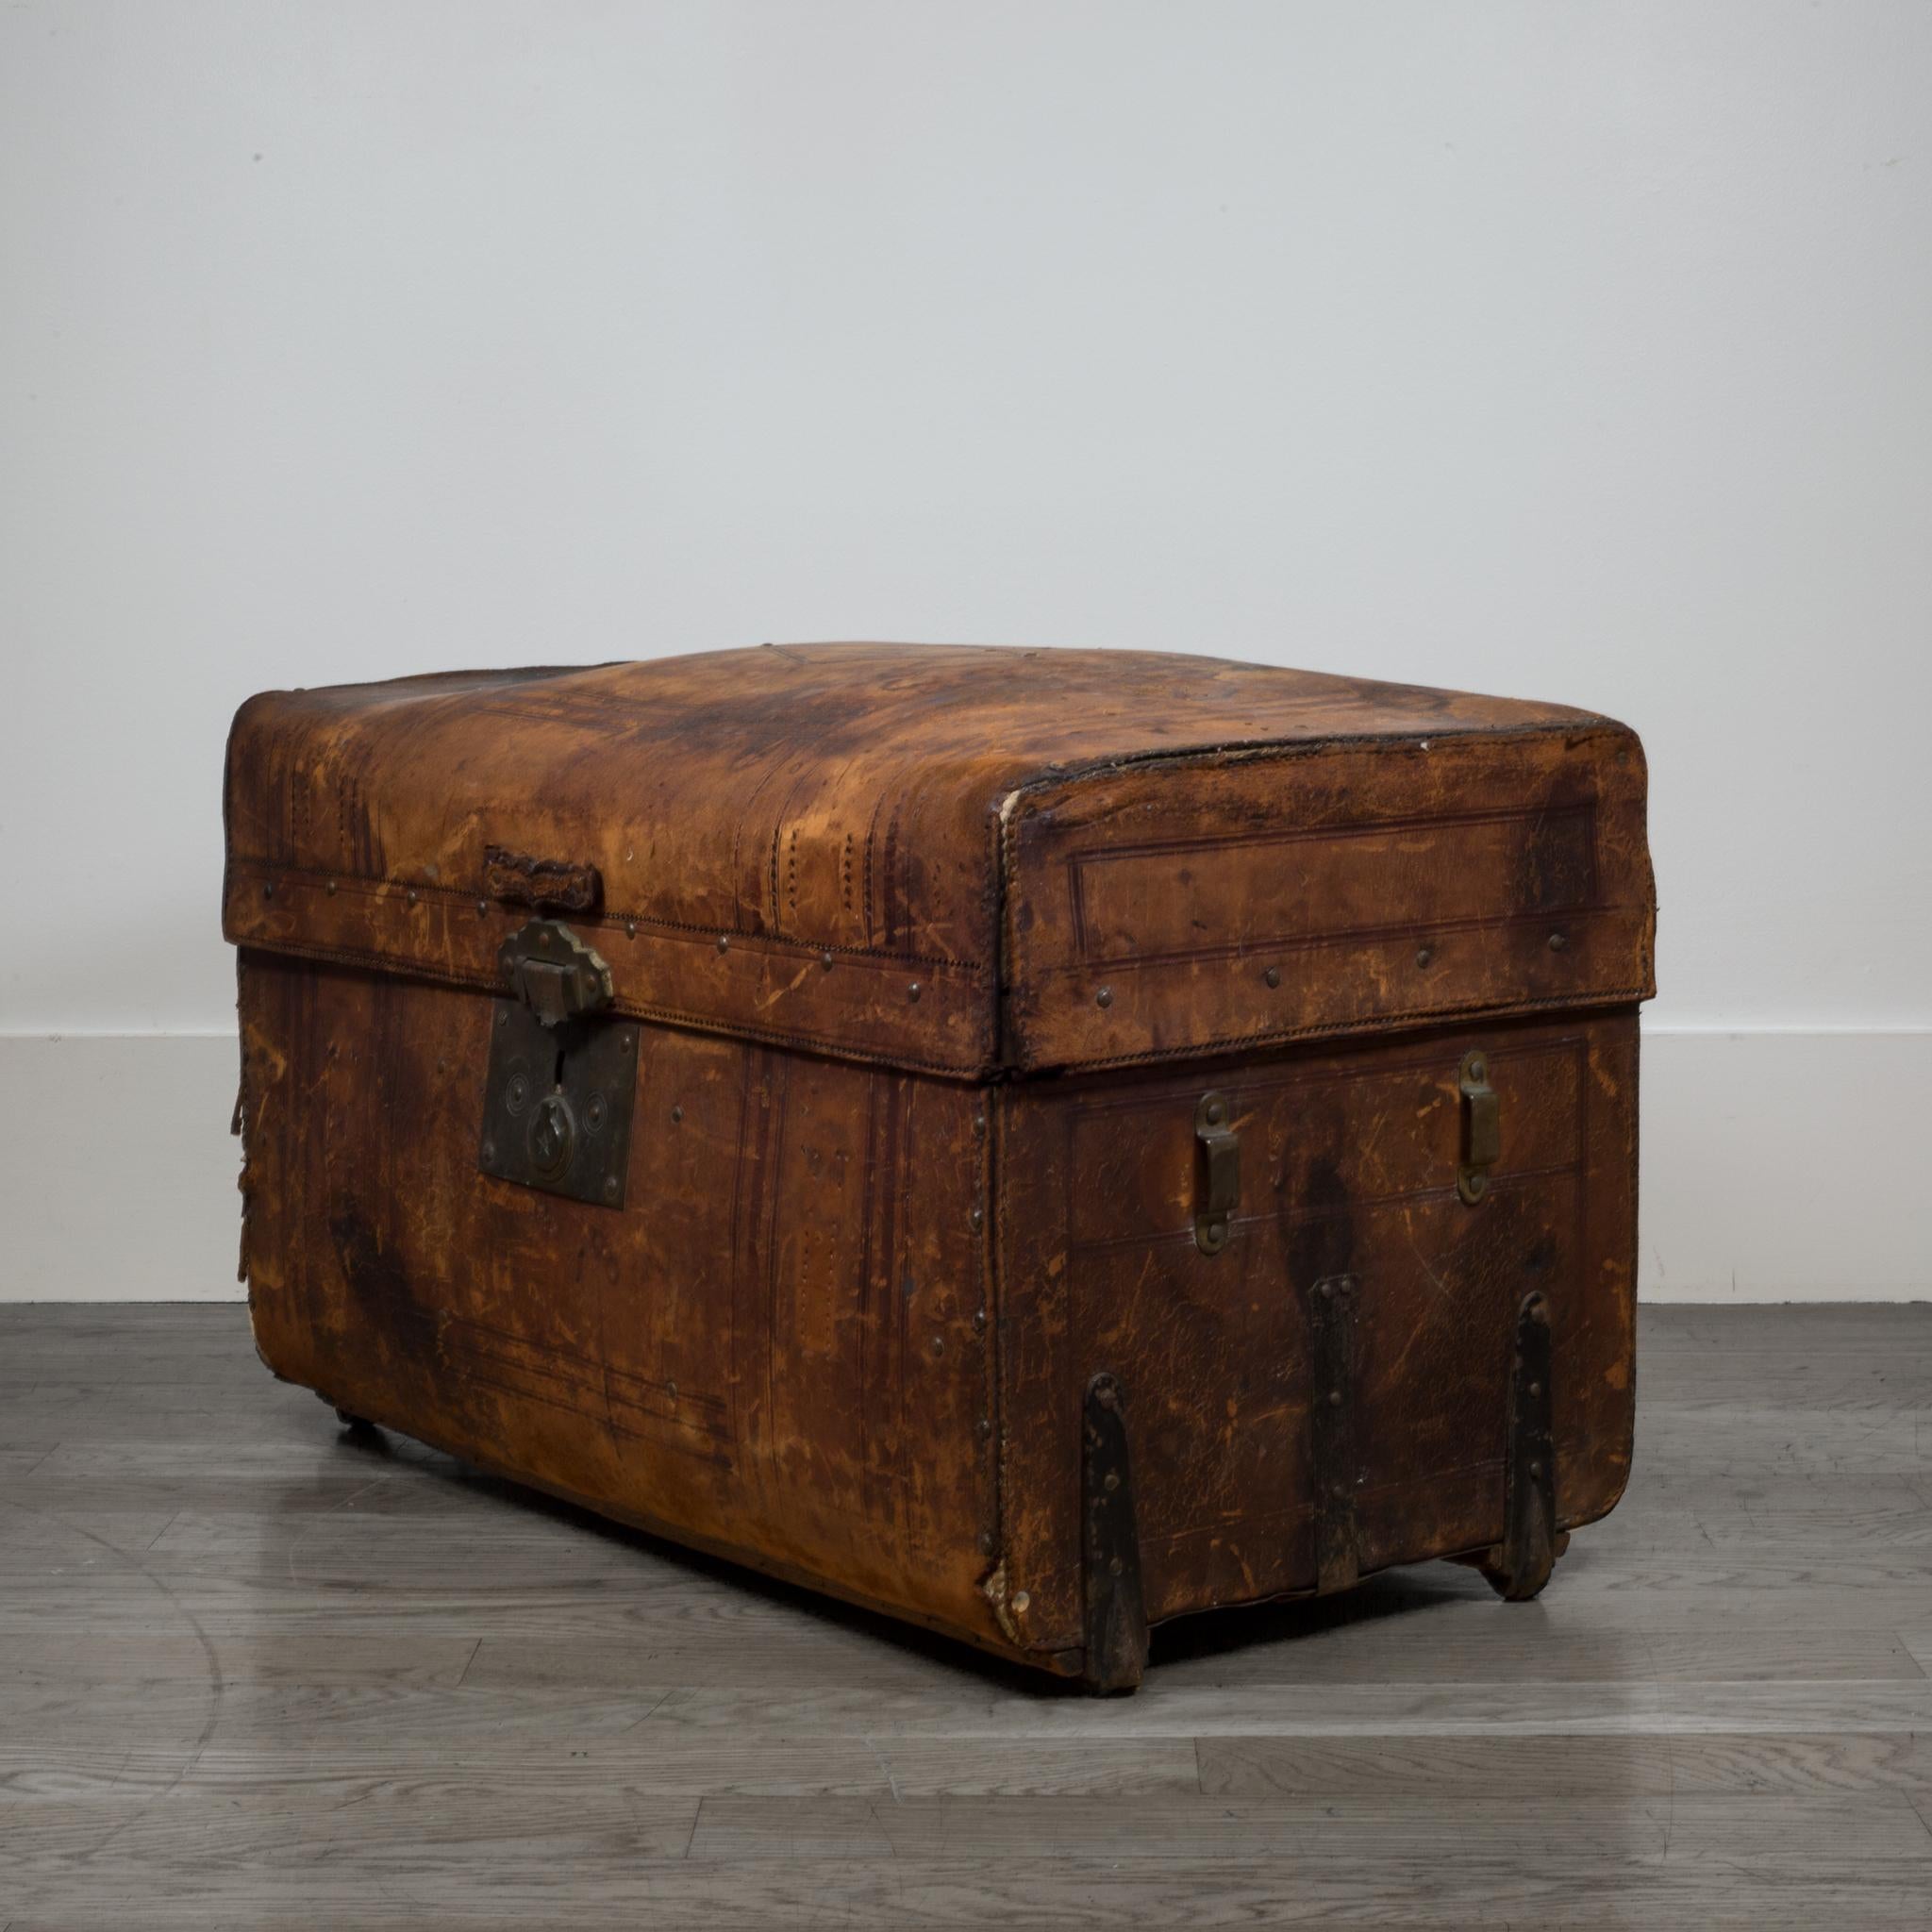 ABOUT

An original leather trunk by D.S. Martin & Co. San Francisco with a fabric storage interior. The trunk is made entirely of leather with steel and brass brackets on the sides and brass rivets over the body. The leather is embossed on the sides